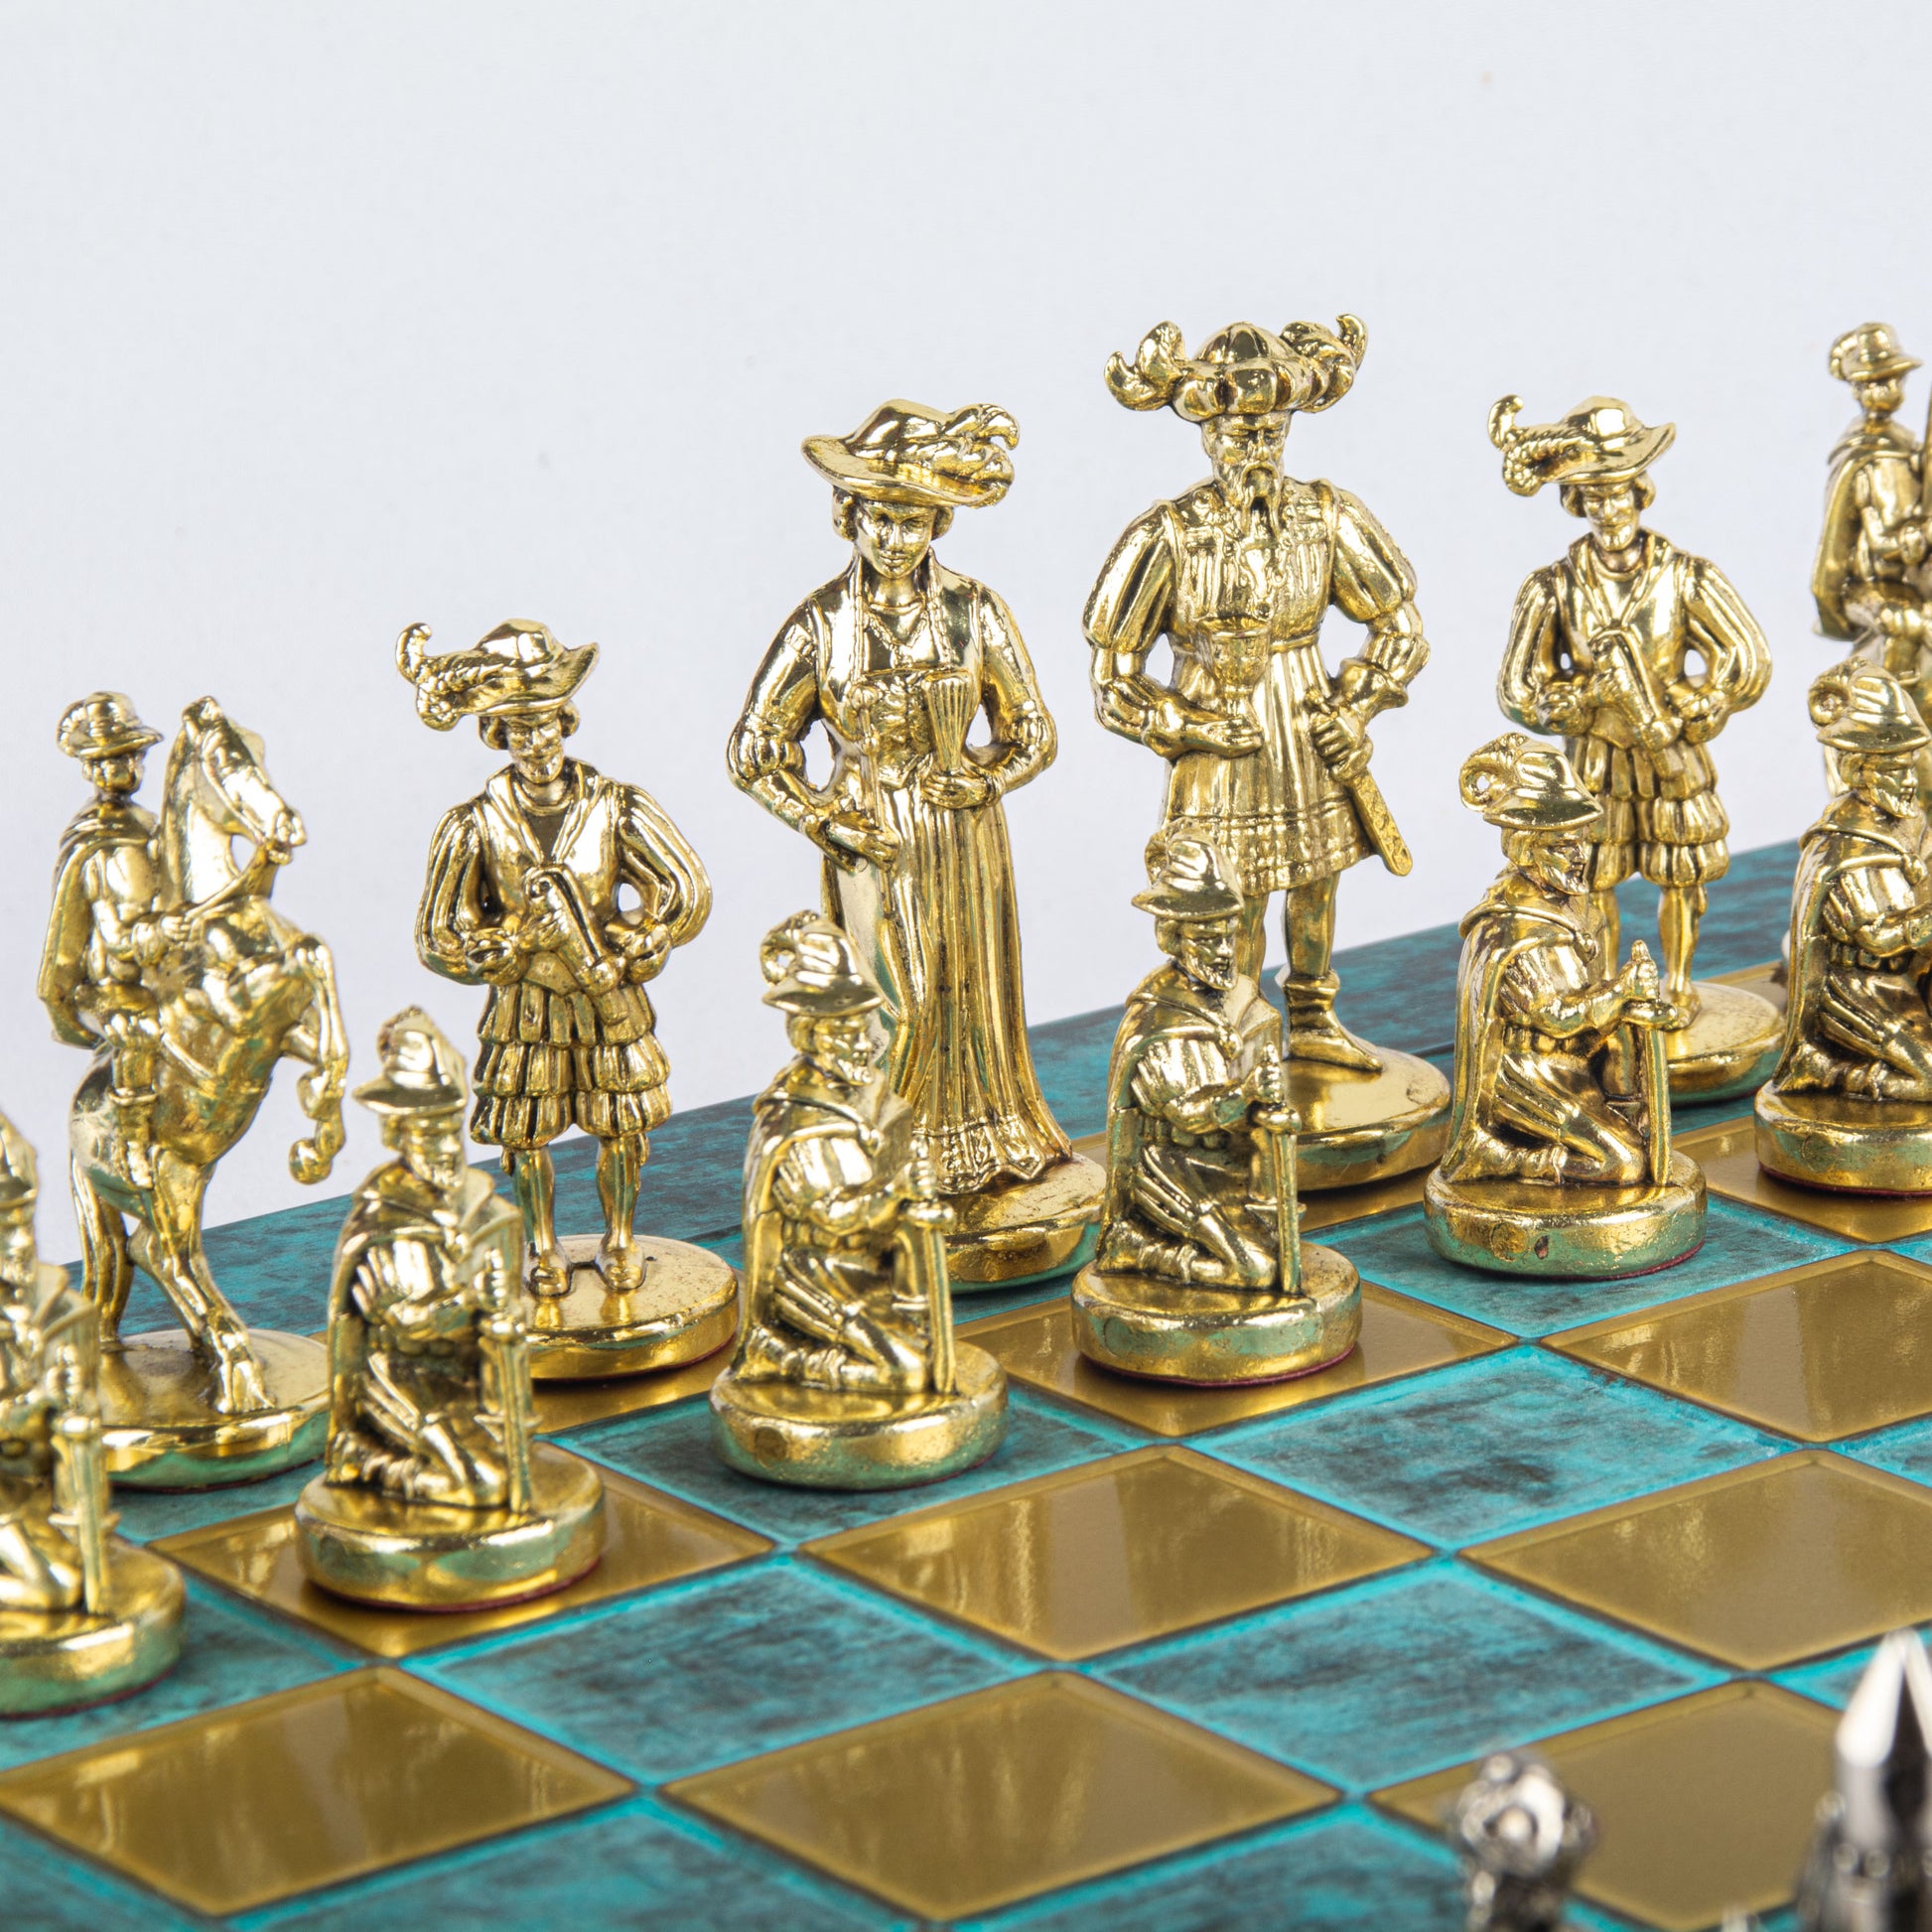 MEDIEVAL KNIGHTS CHESS SET with gold/silver chessmen and bronze chessboard 44 x 44cm  (Large) - Premium Chess from MANOPOULOS Chess & Backgammon - Just €275! Shop now at MANOPOULOS Chess & Backgammon